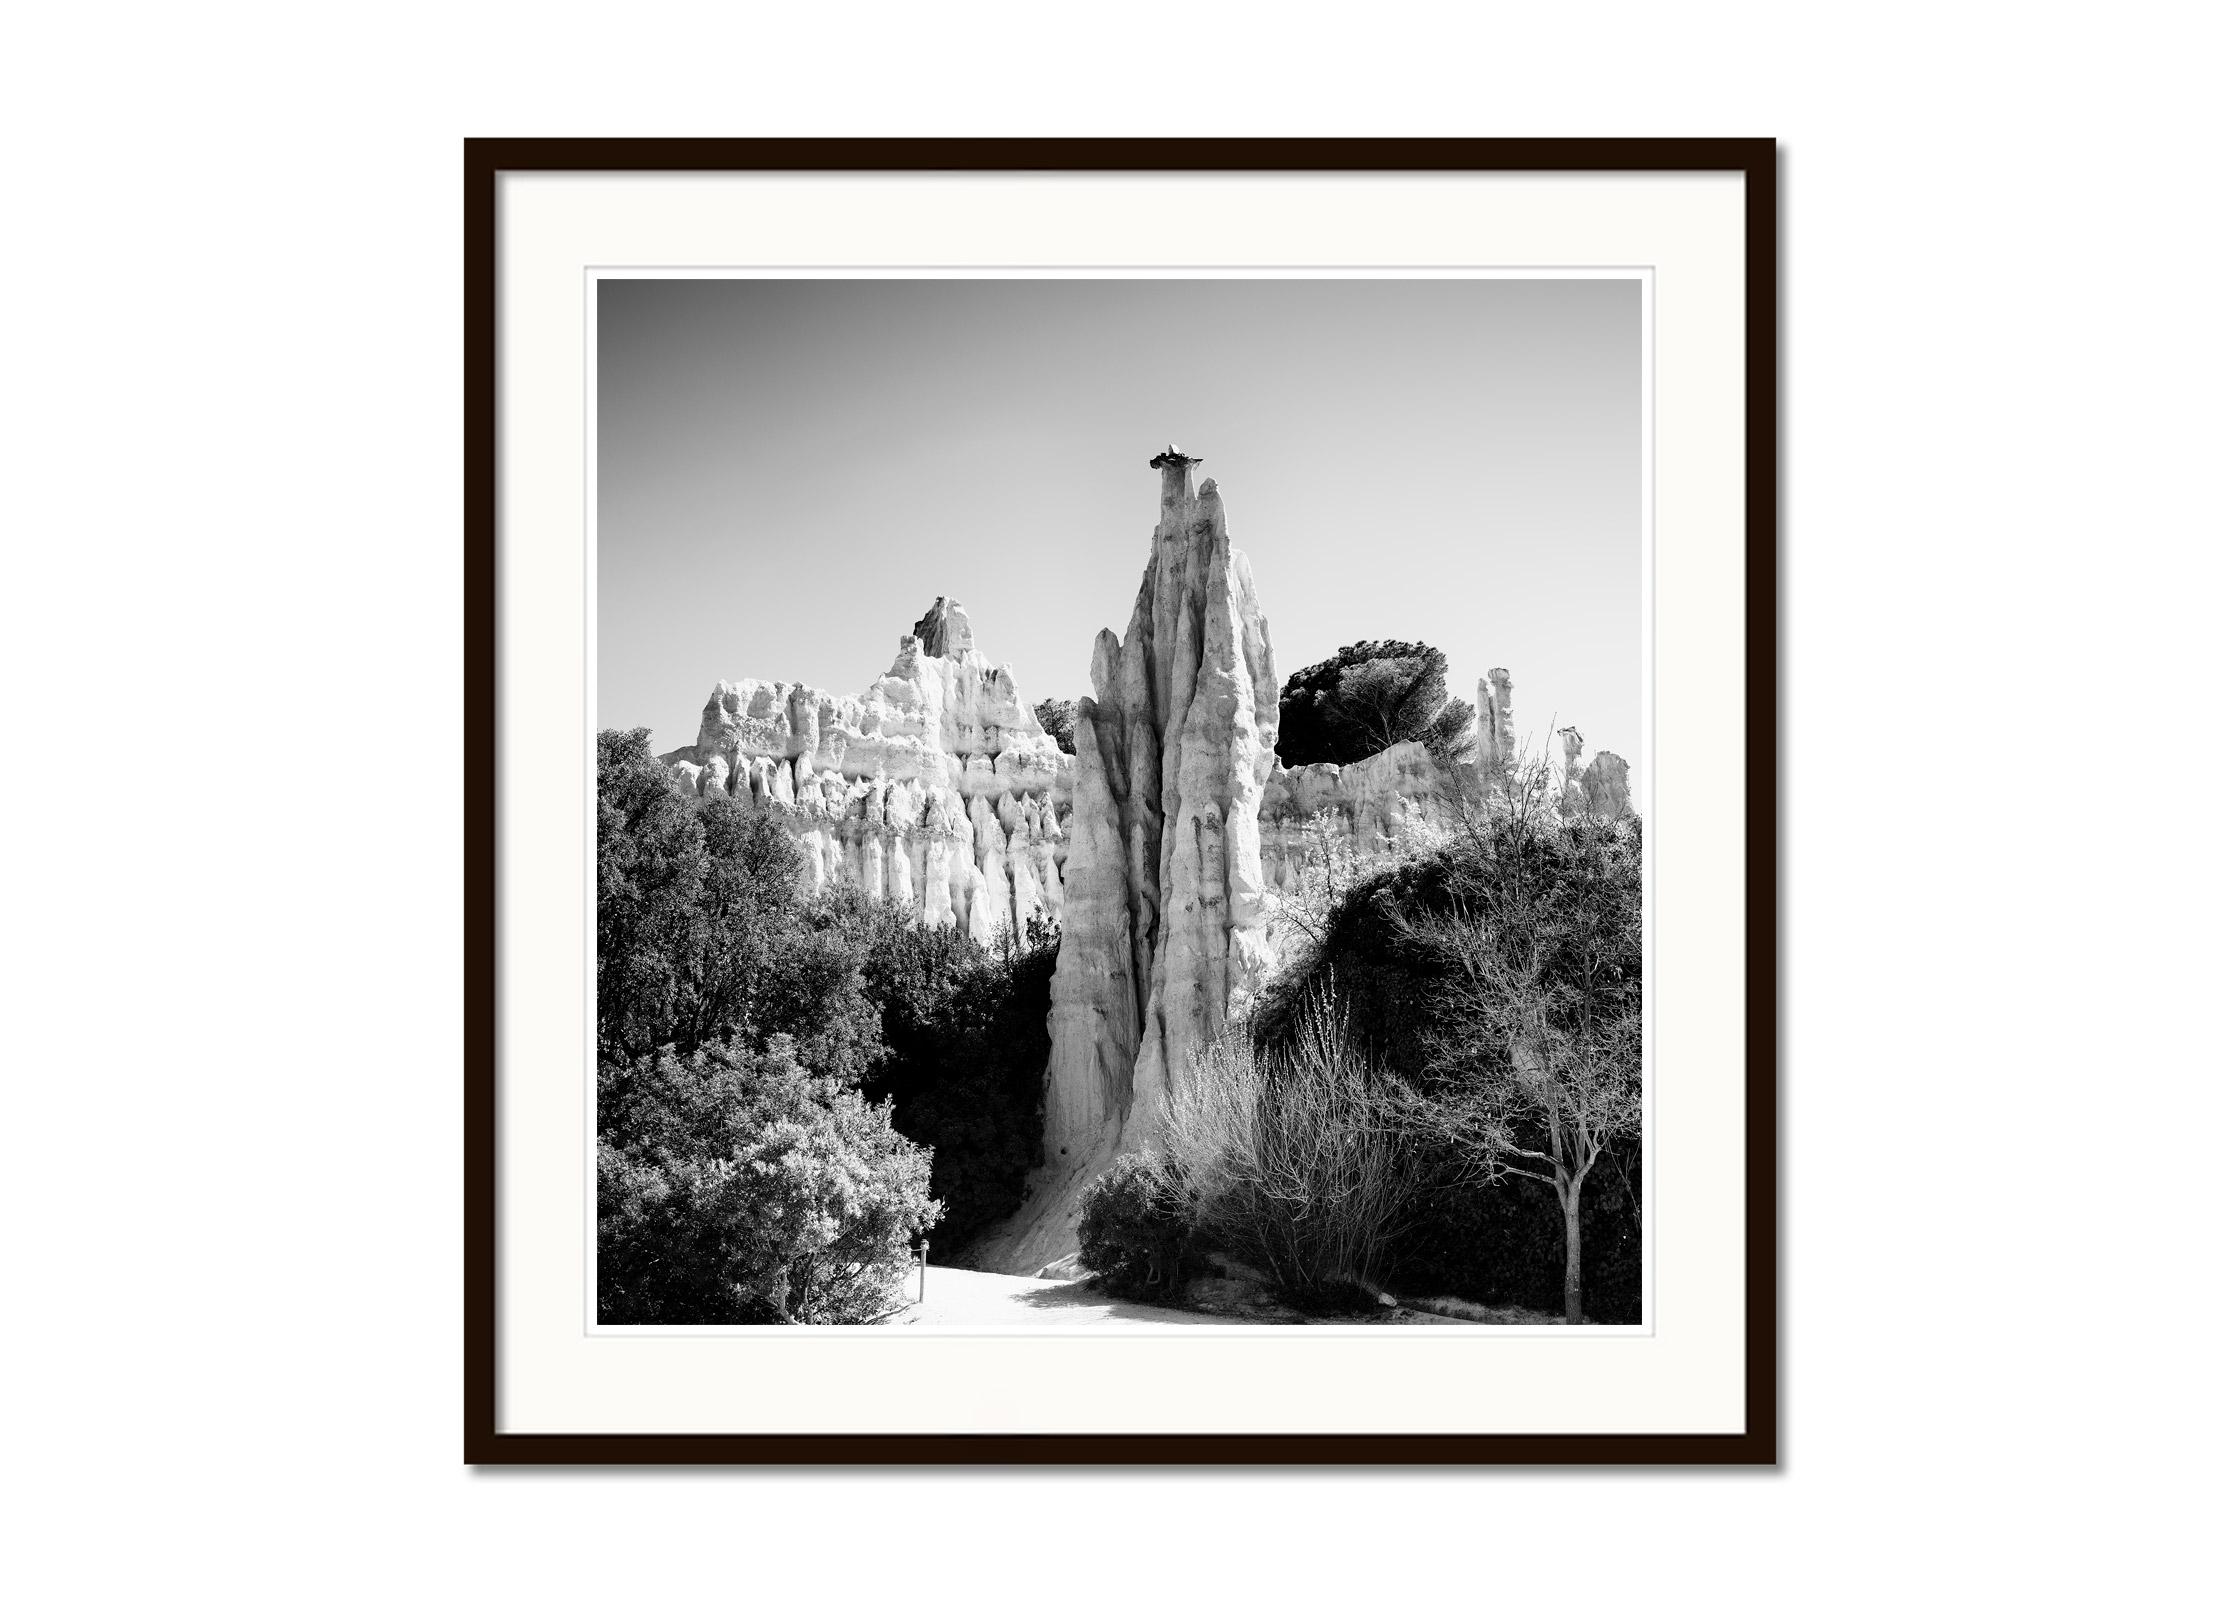 Black and white fine art landscape photography print. Archival pigment ink print, edition of 7. Signed, titled, dated and numbered by artist. Certificate of authenticity included. Printed with 4cm white border.
International award winner